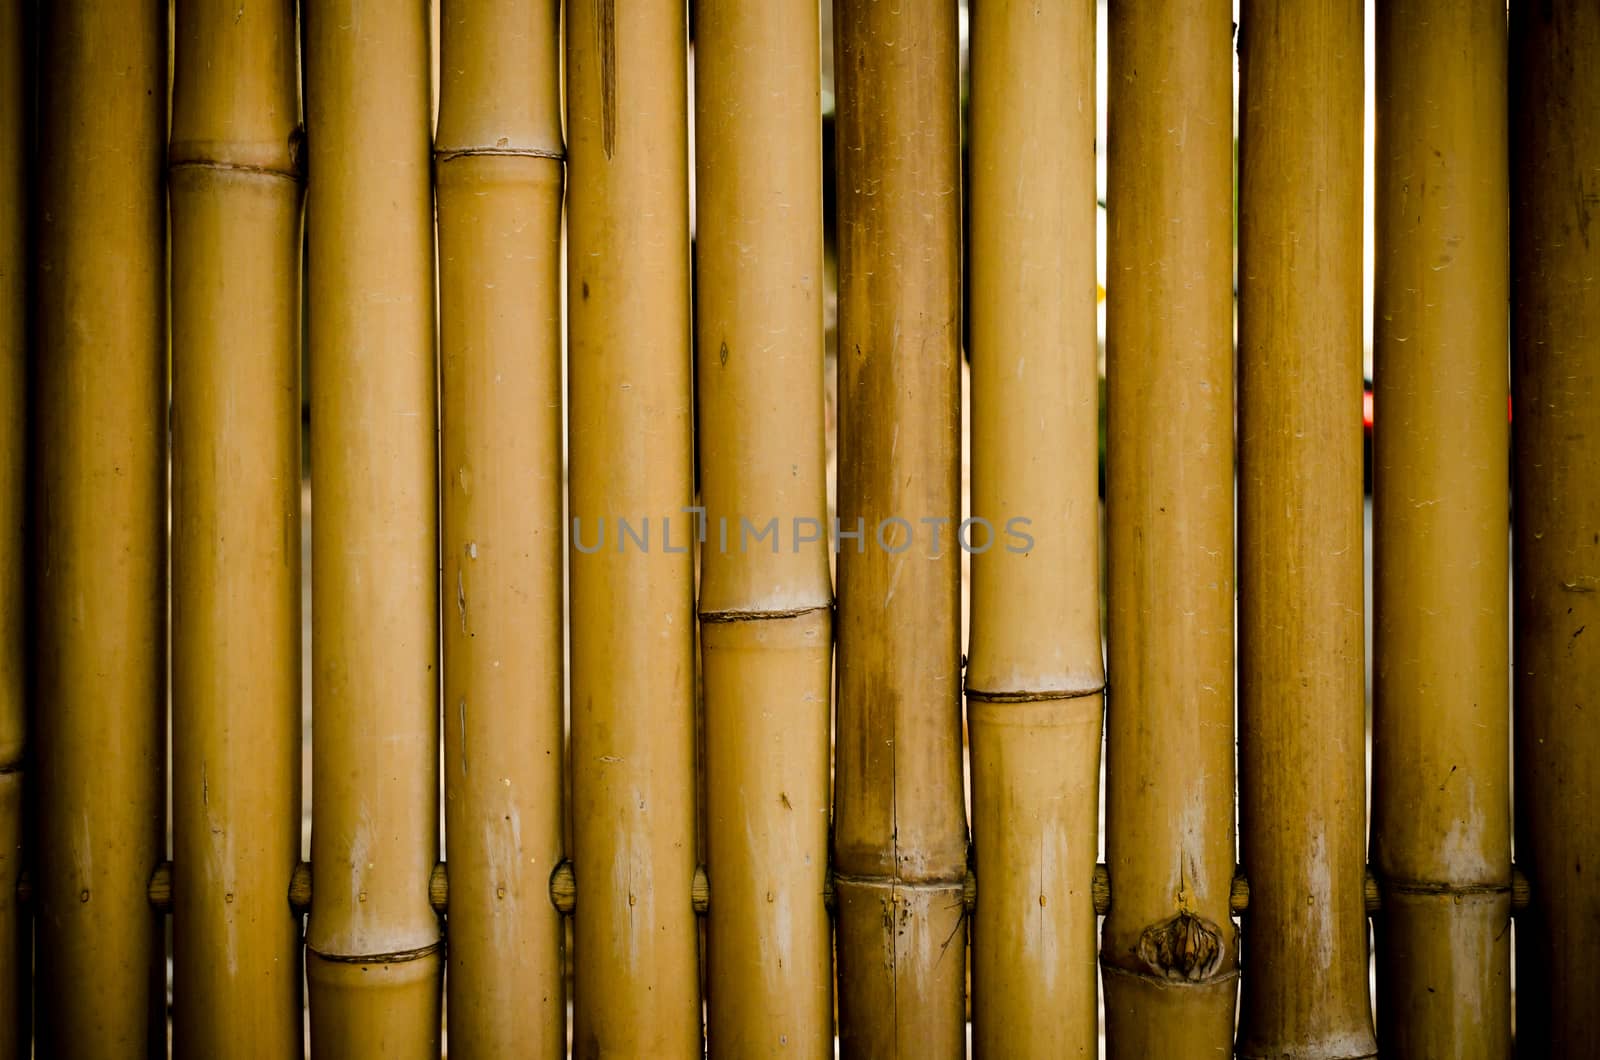 grunge yellow bamboo background and texture Low-key lighting by nopparats